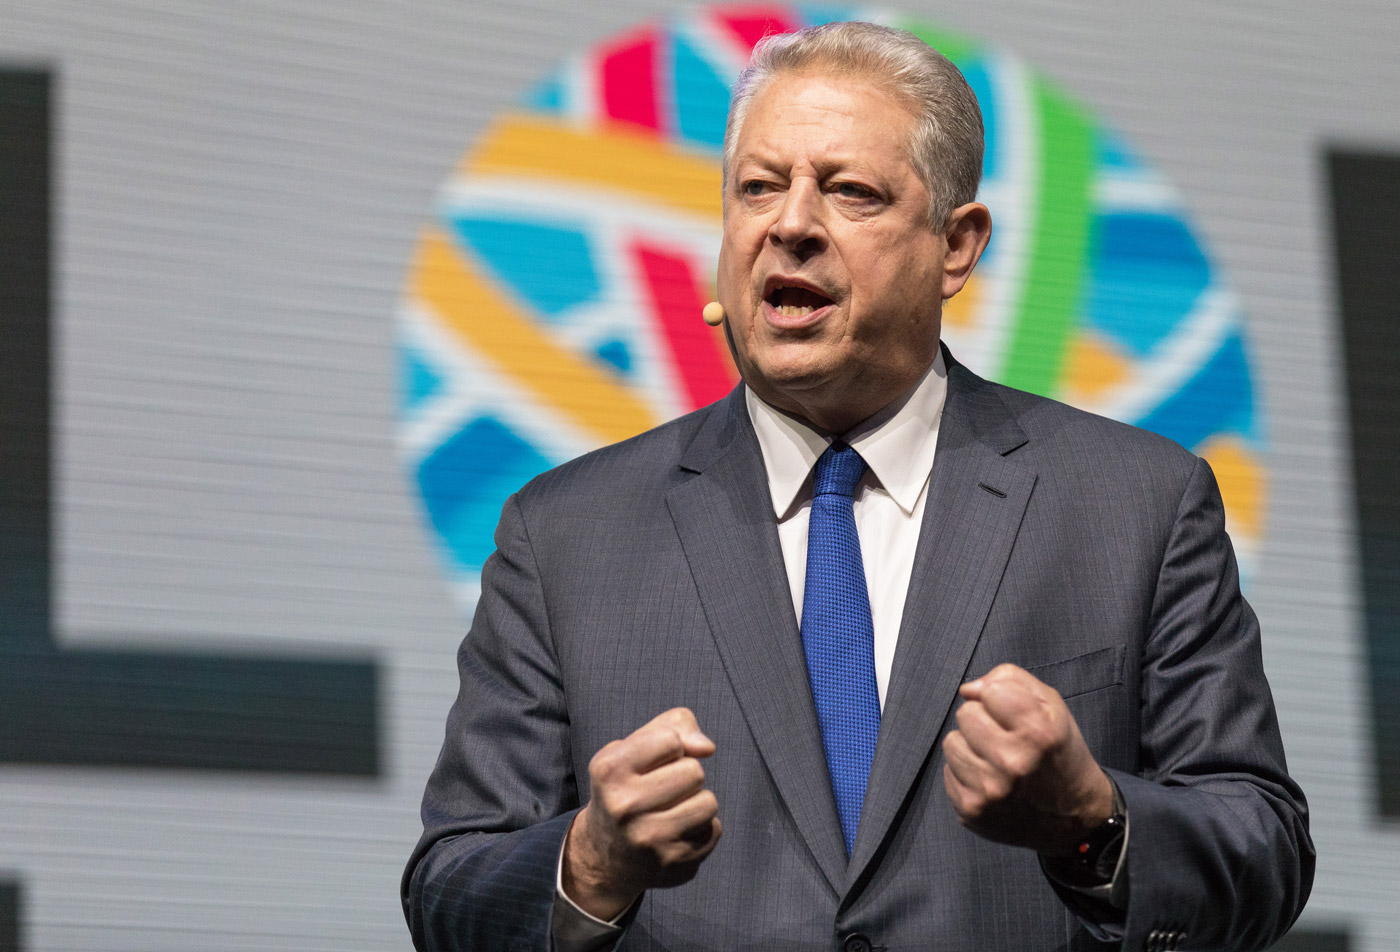 Al Gore at the San Francisco Moscone Convention Center Event Photography